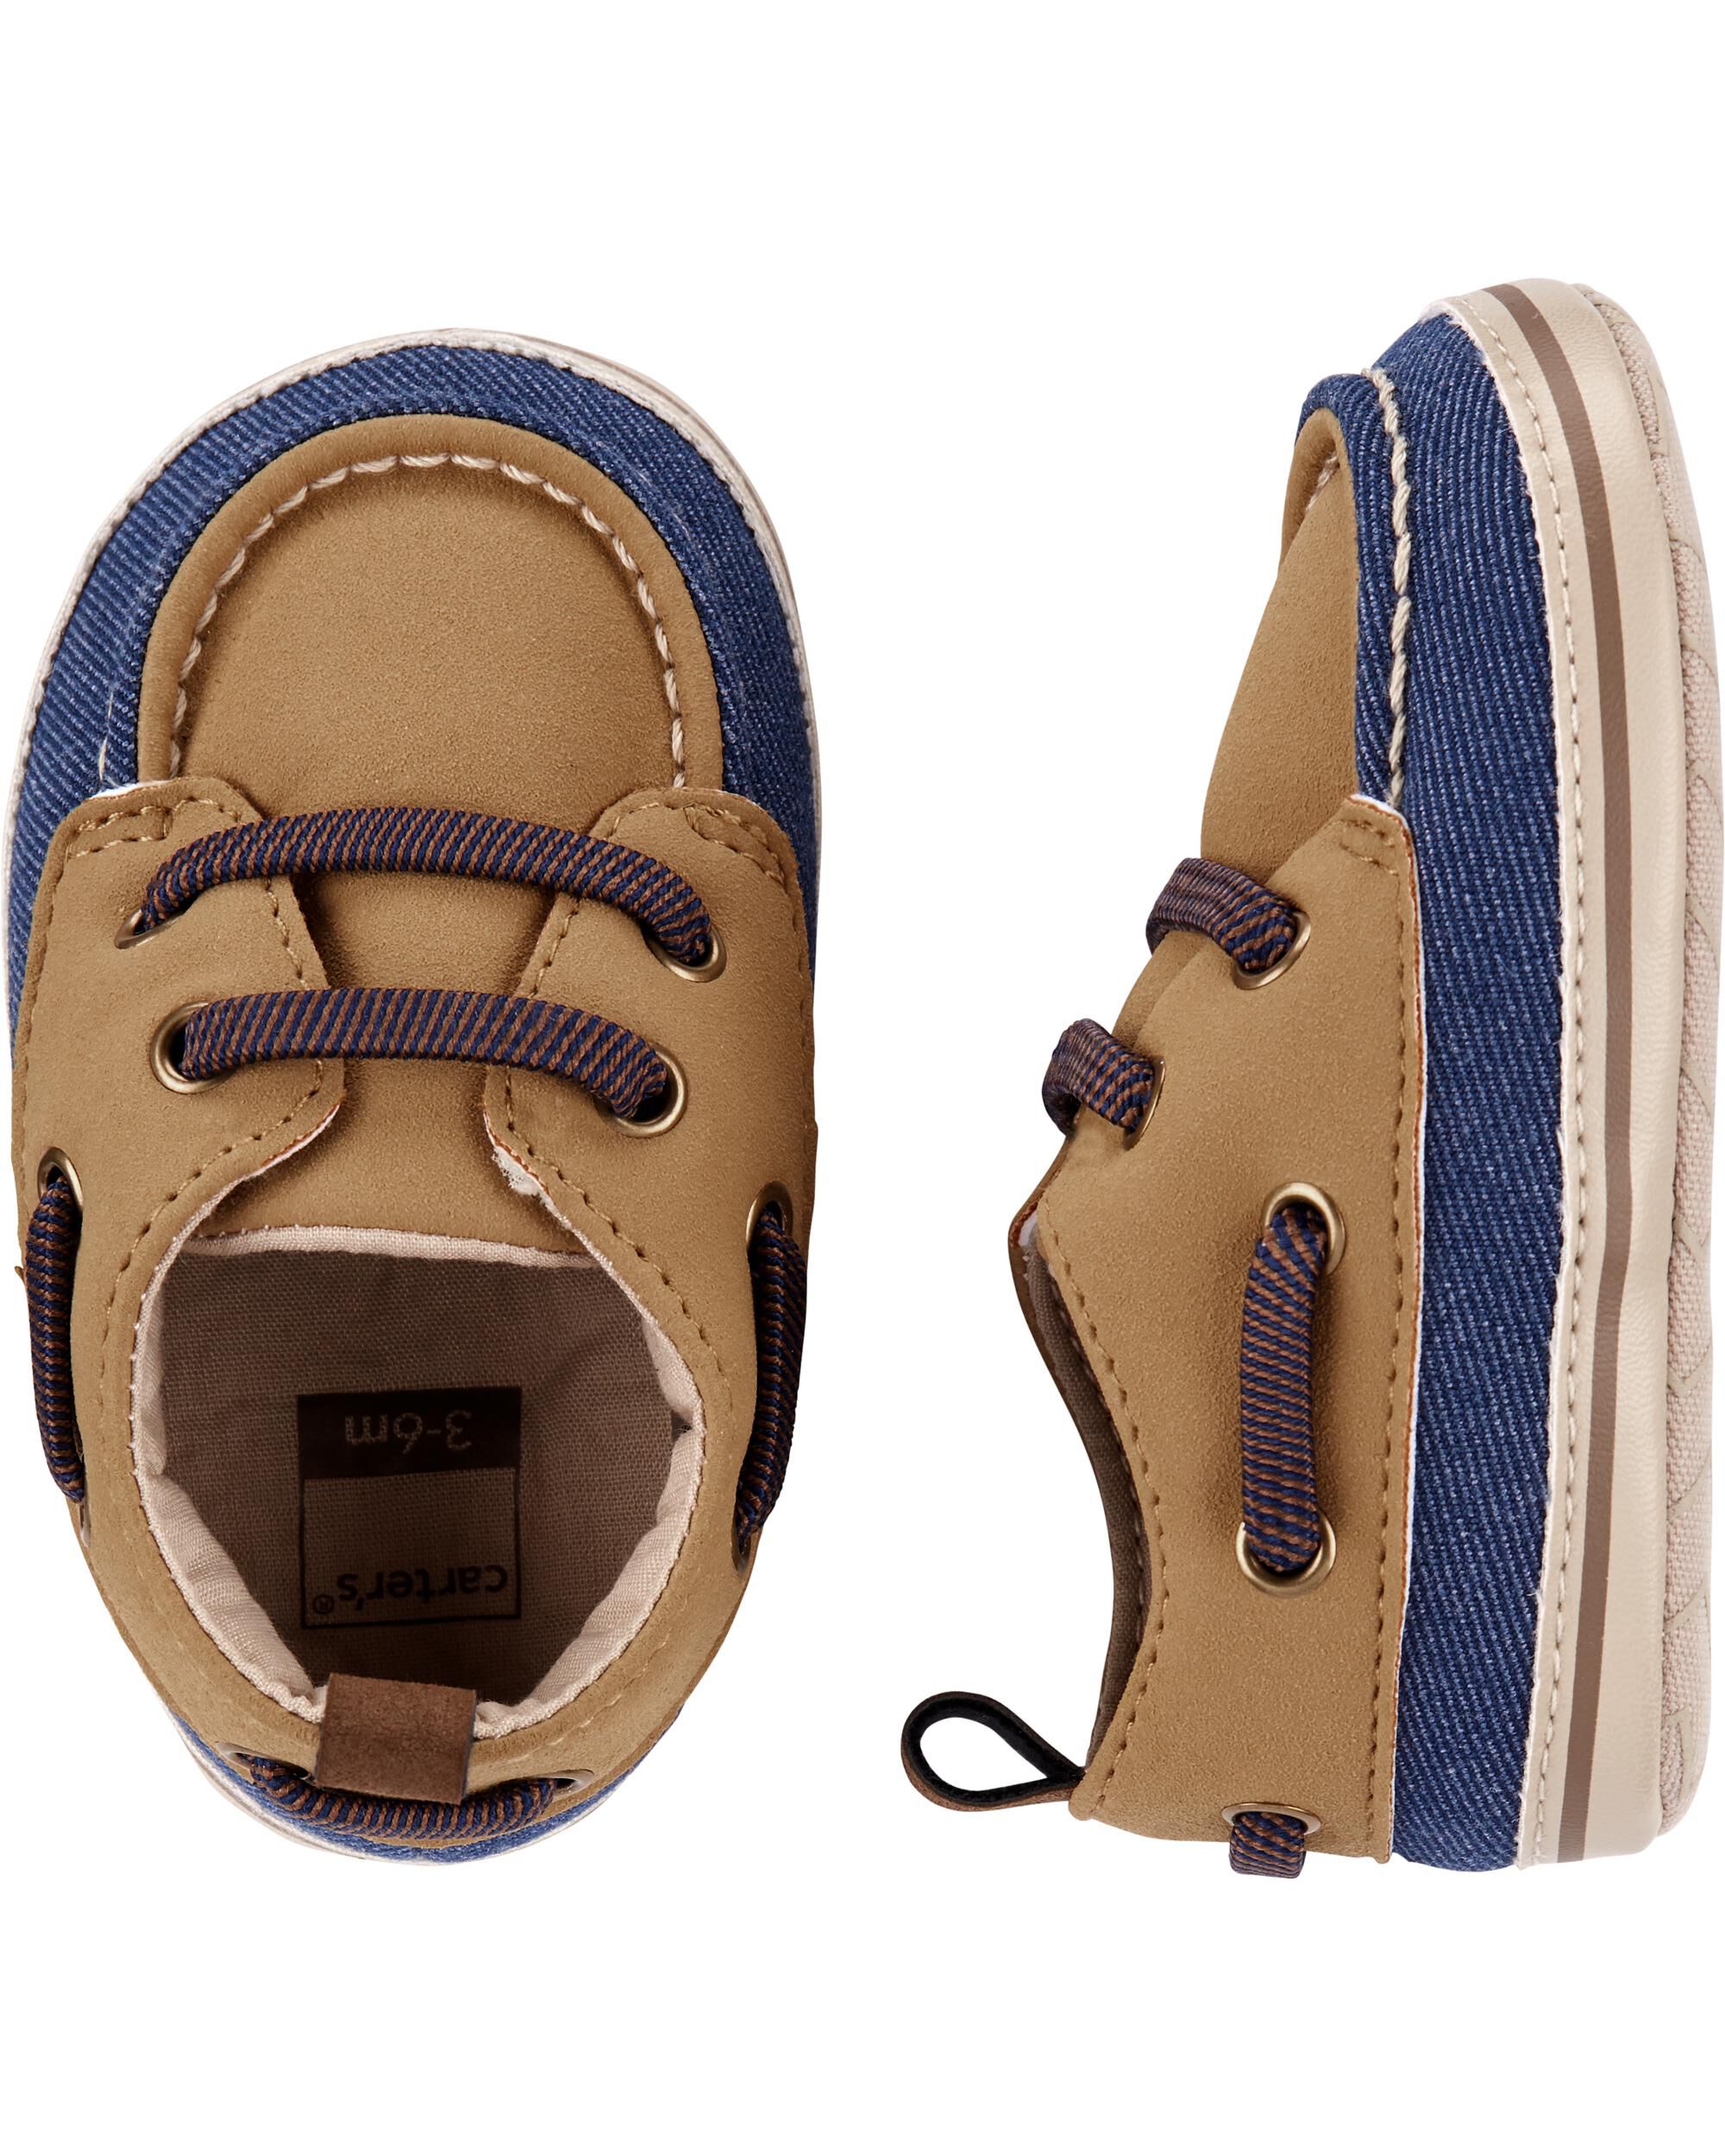 carters baby boy shoes